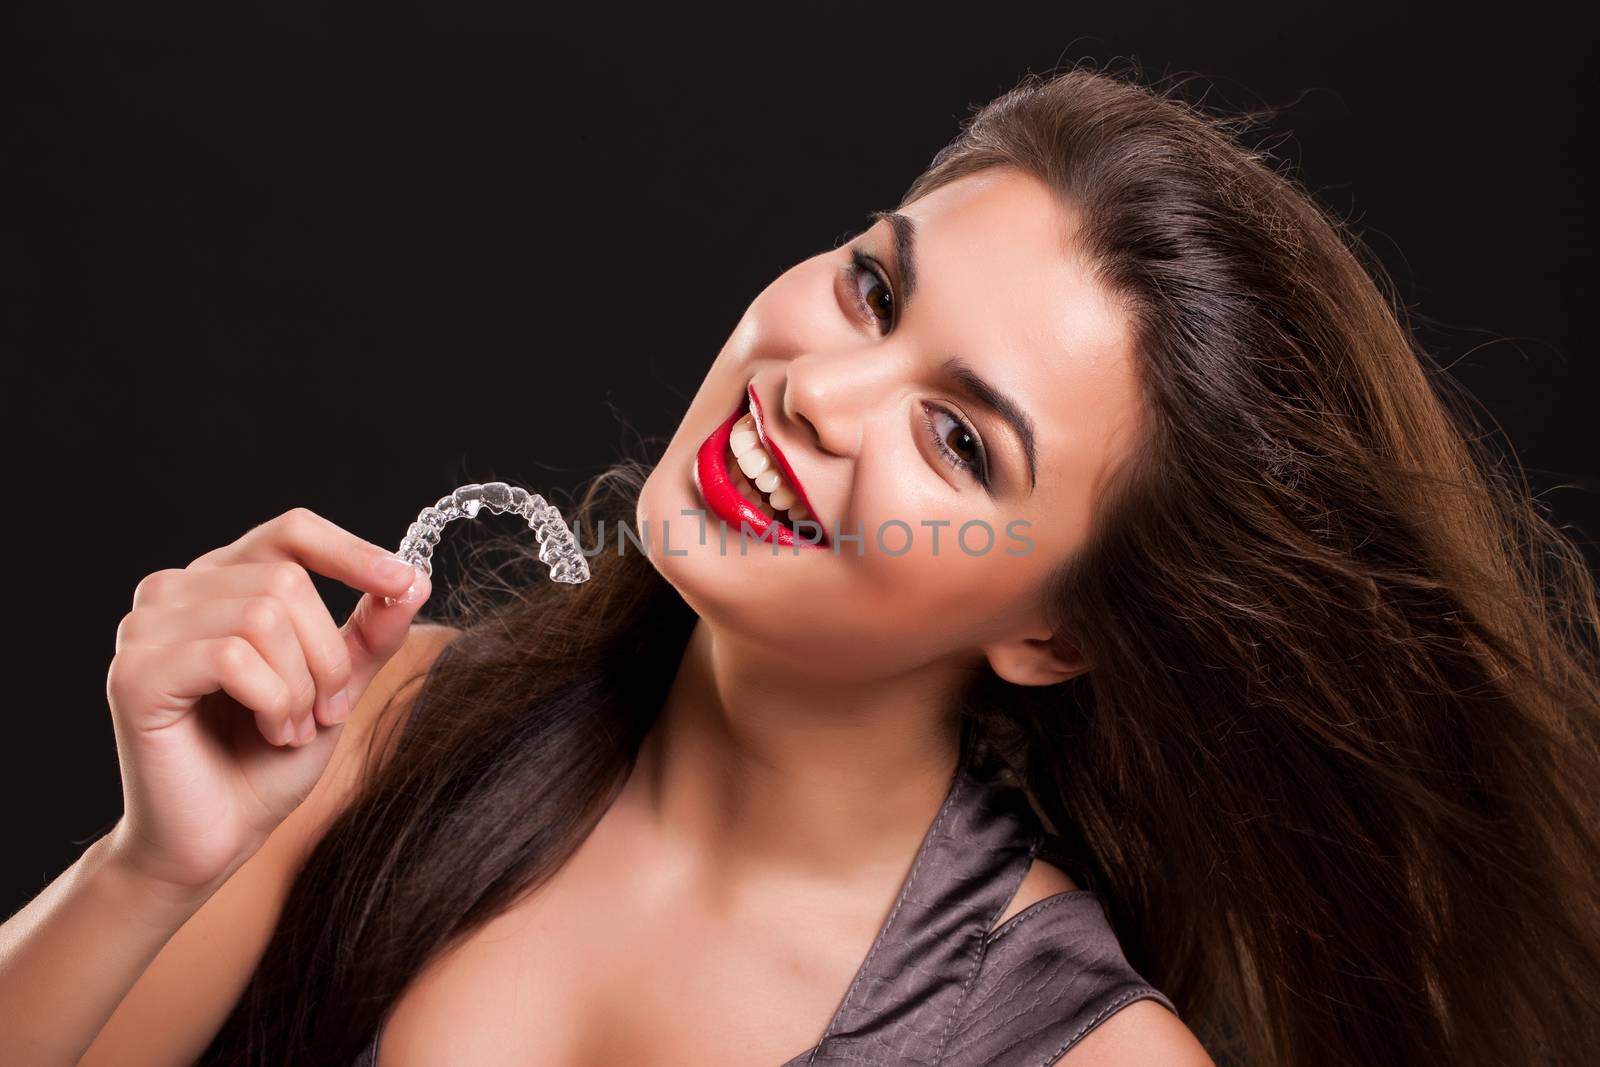 Young Beautiful Smiling Woman With Dental Braces by Fotoskat